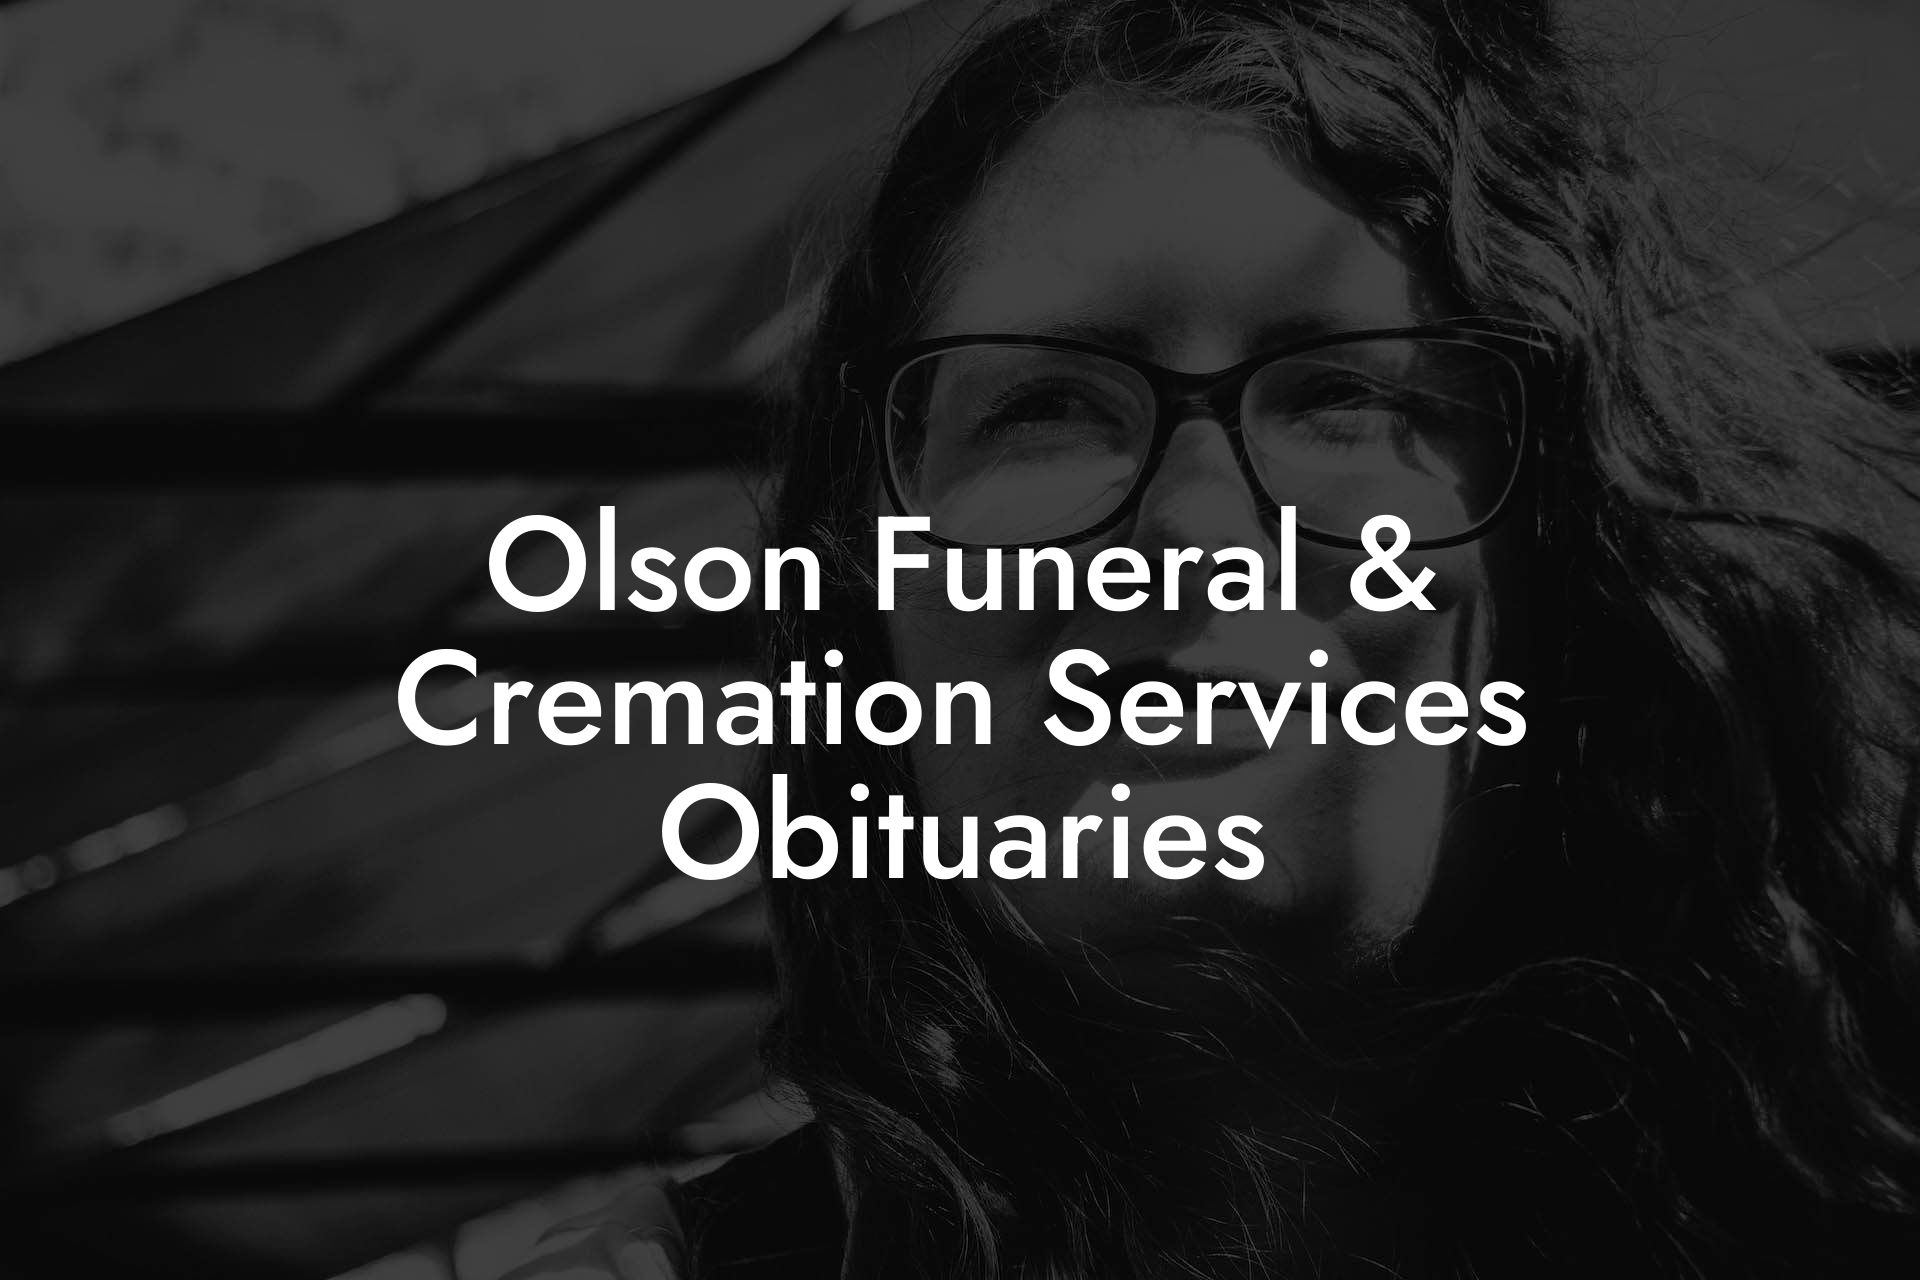 Olson Funeral & Cremation Services Obituaries